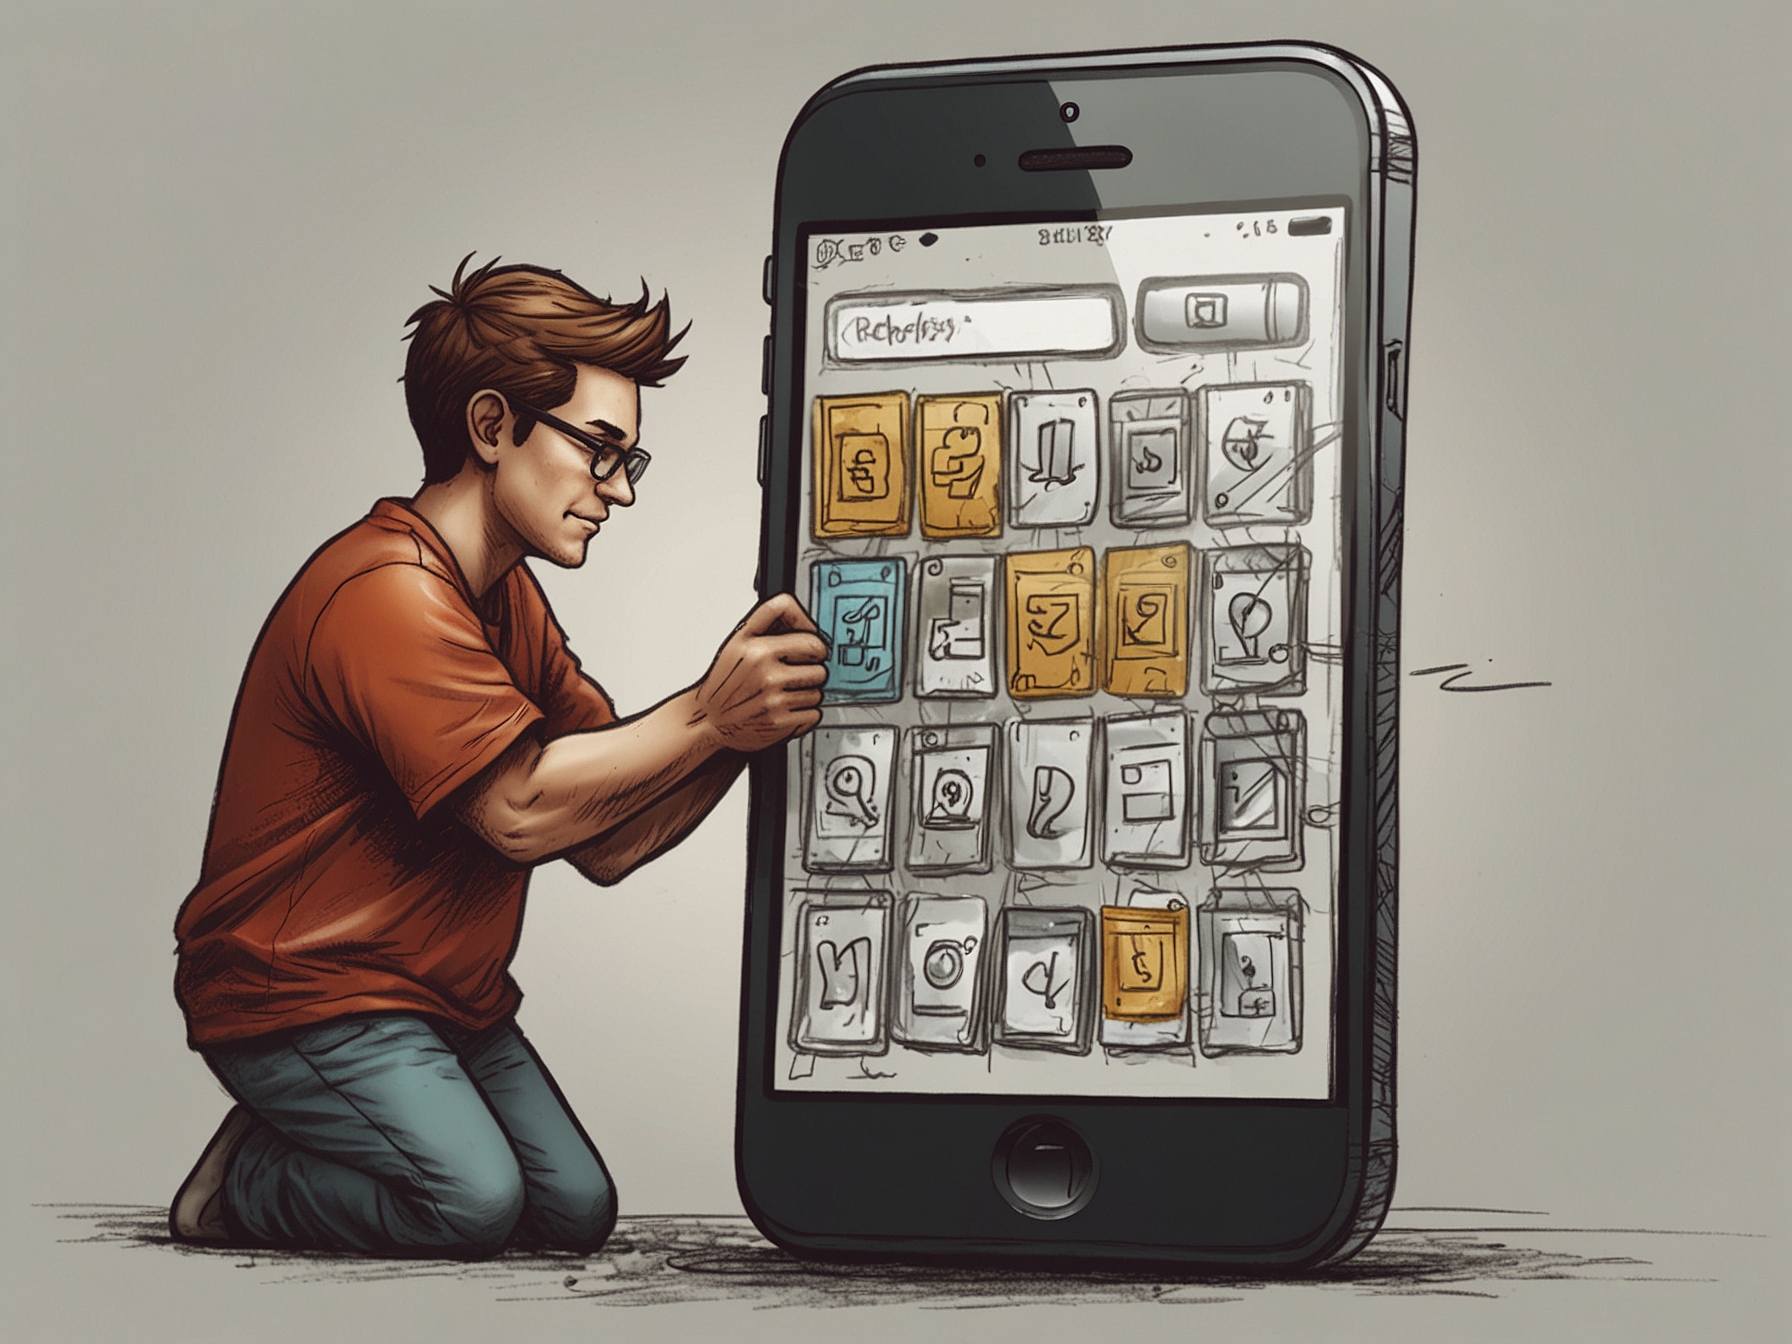 Depiction of an iPhone user creating a hidden folder by dragging one app icon over another. The steps to organize and secure apps in a hidden page are shown.